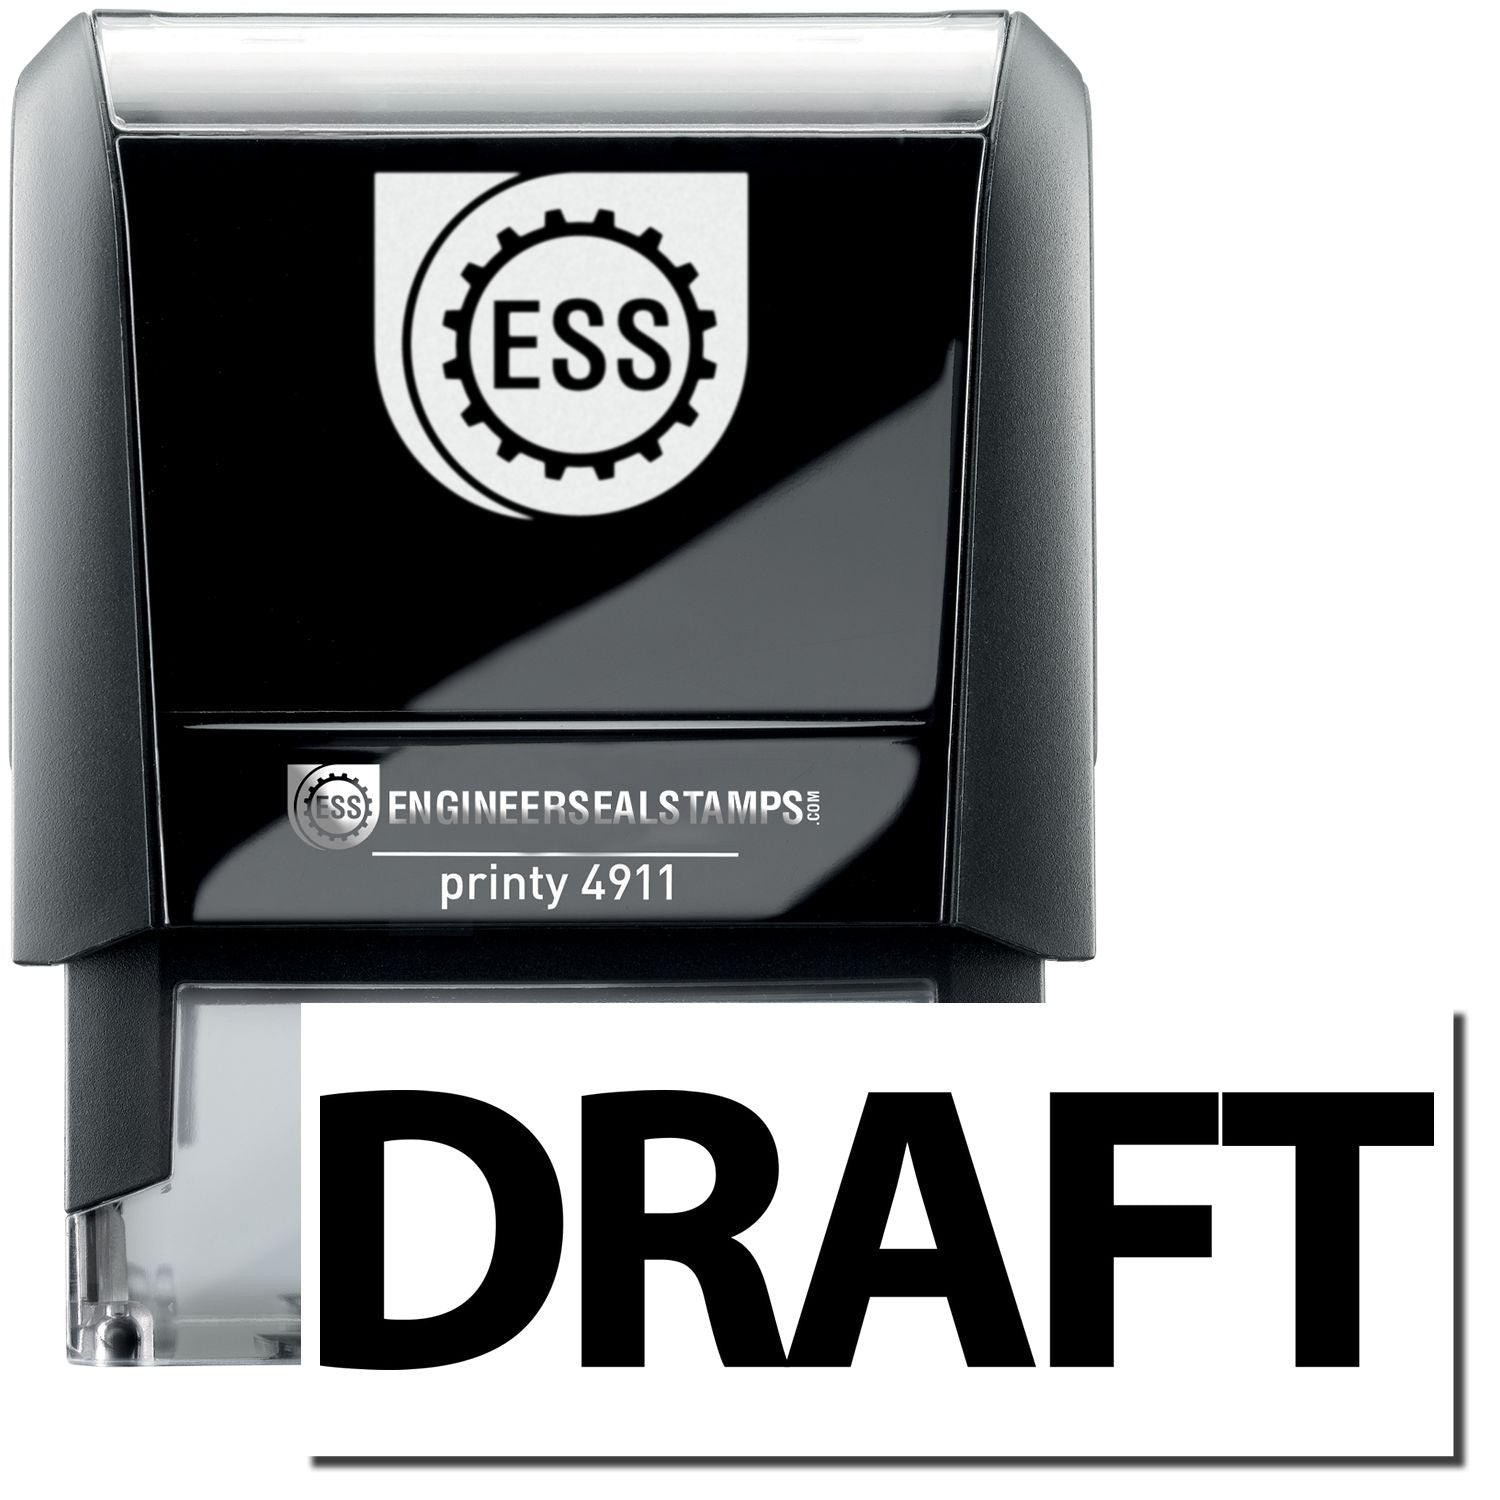 A self-inking stamp with a stamped image showing how the text "DRAFT" in bold font is displayed after stamping.